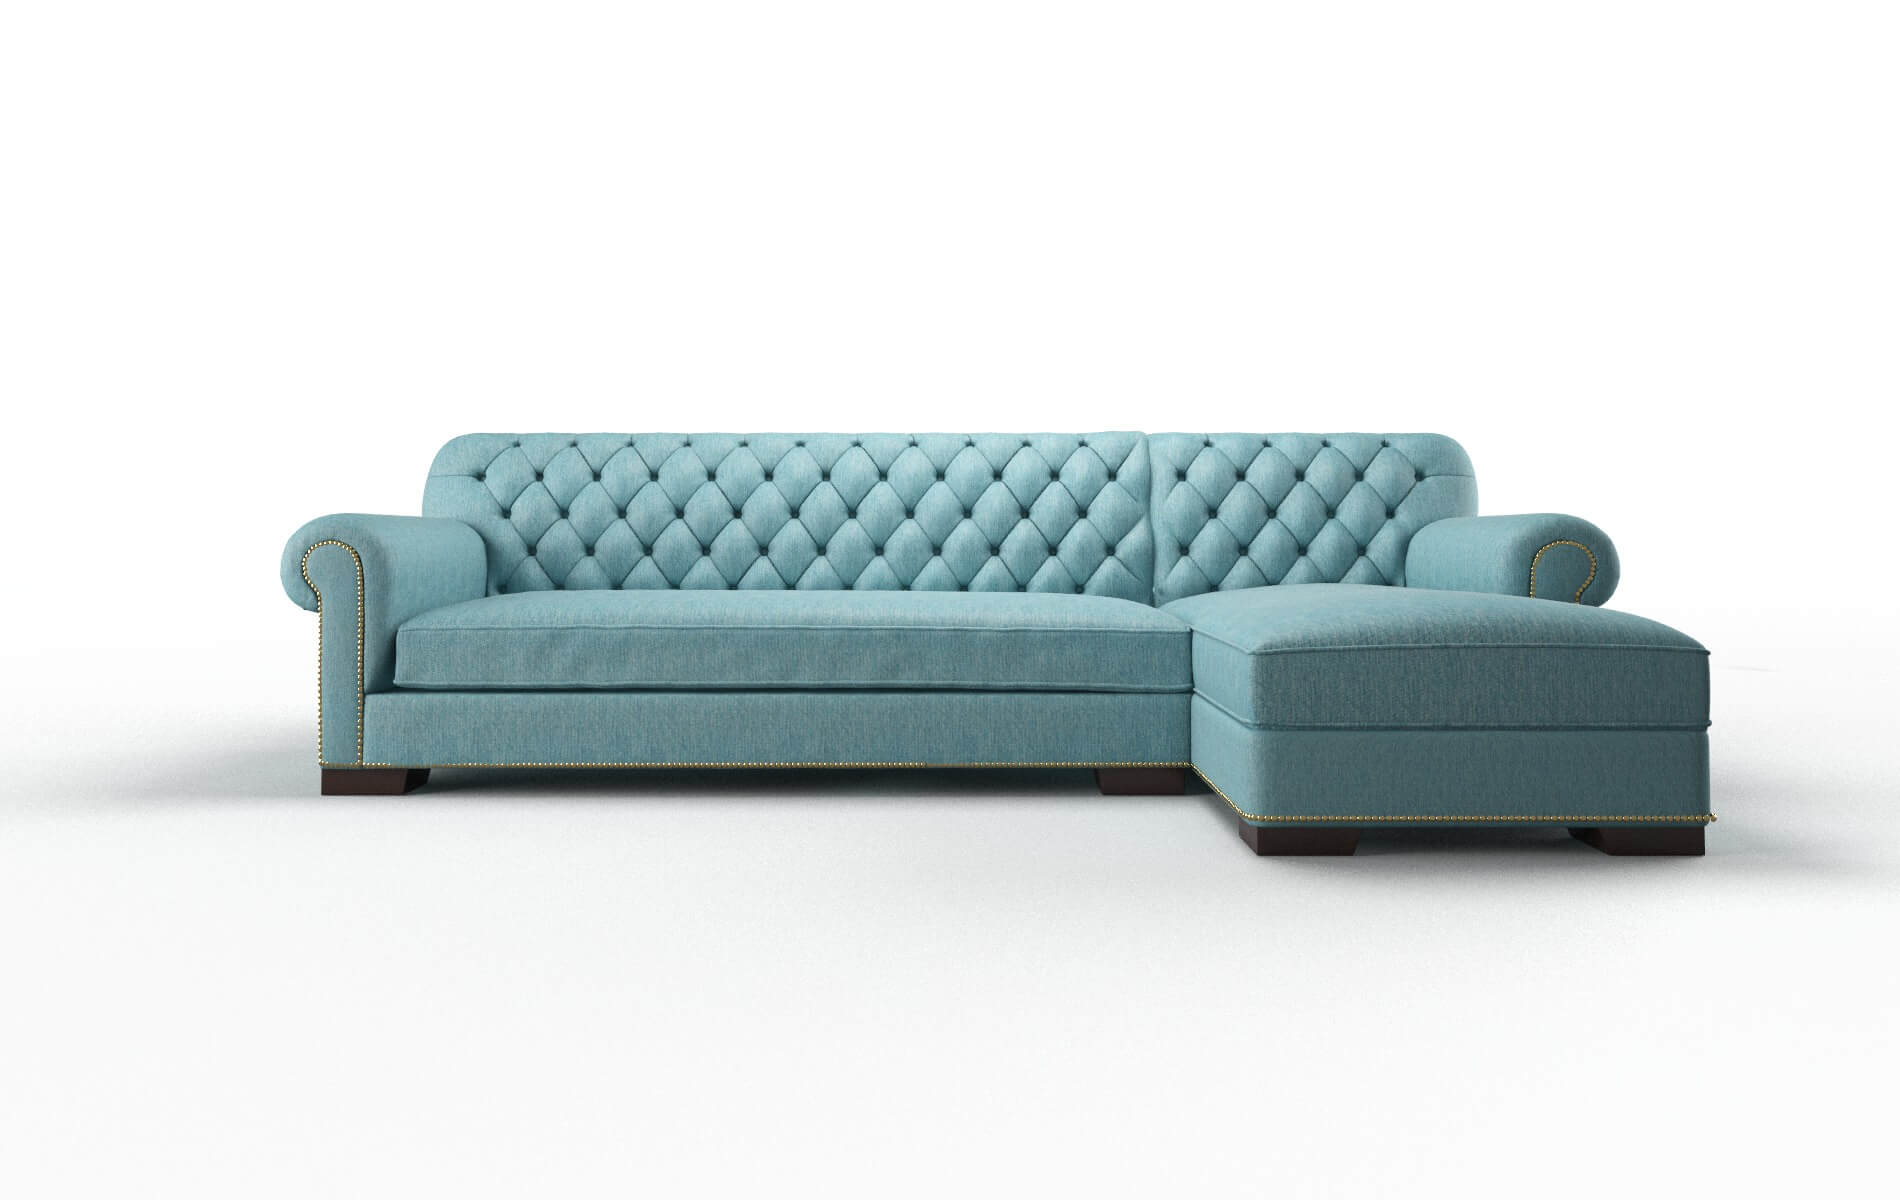 Chester Cosmo Turquoise chair espresso legs